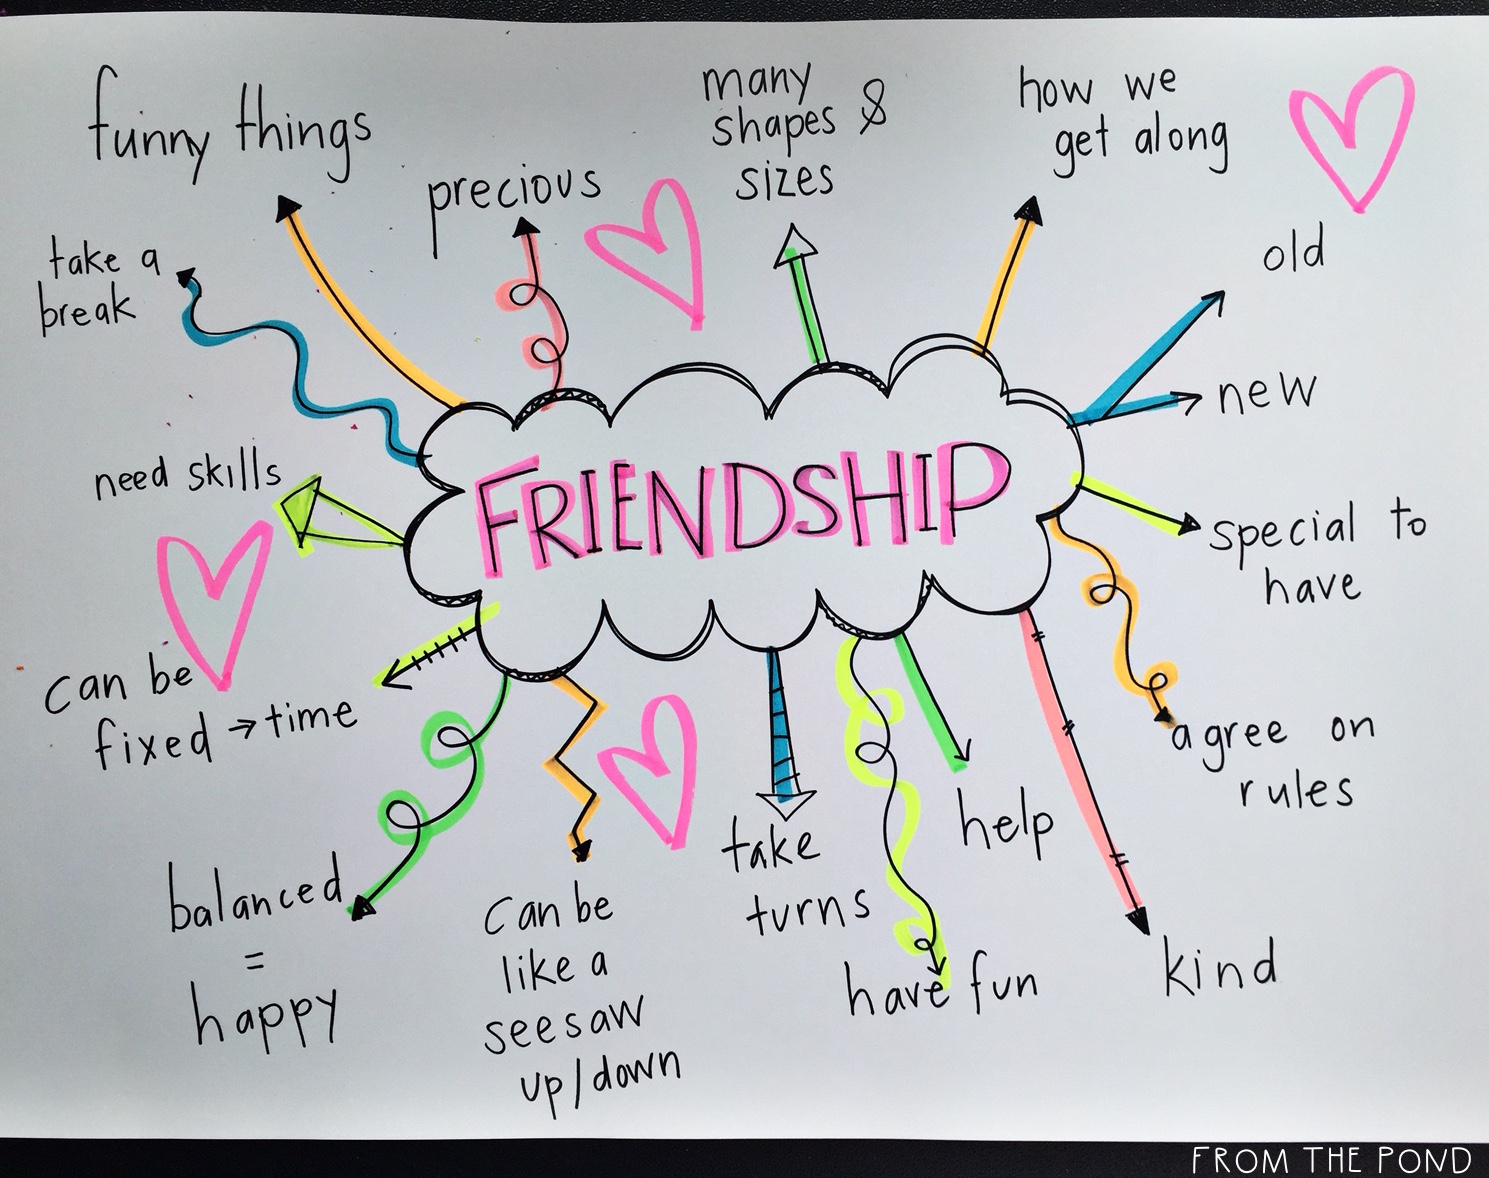 Friendship Lessons From 'Friends